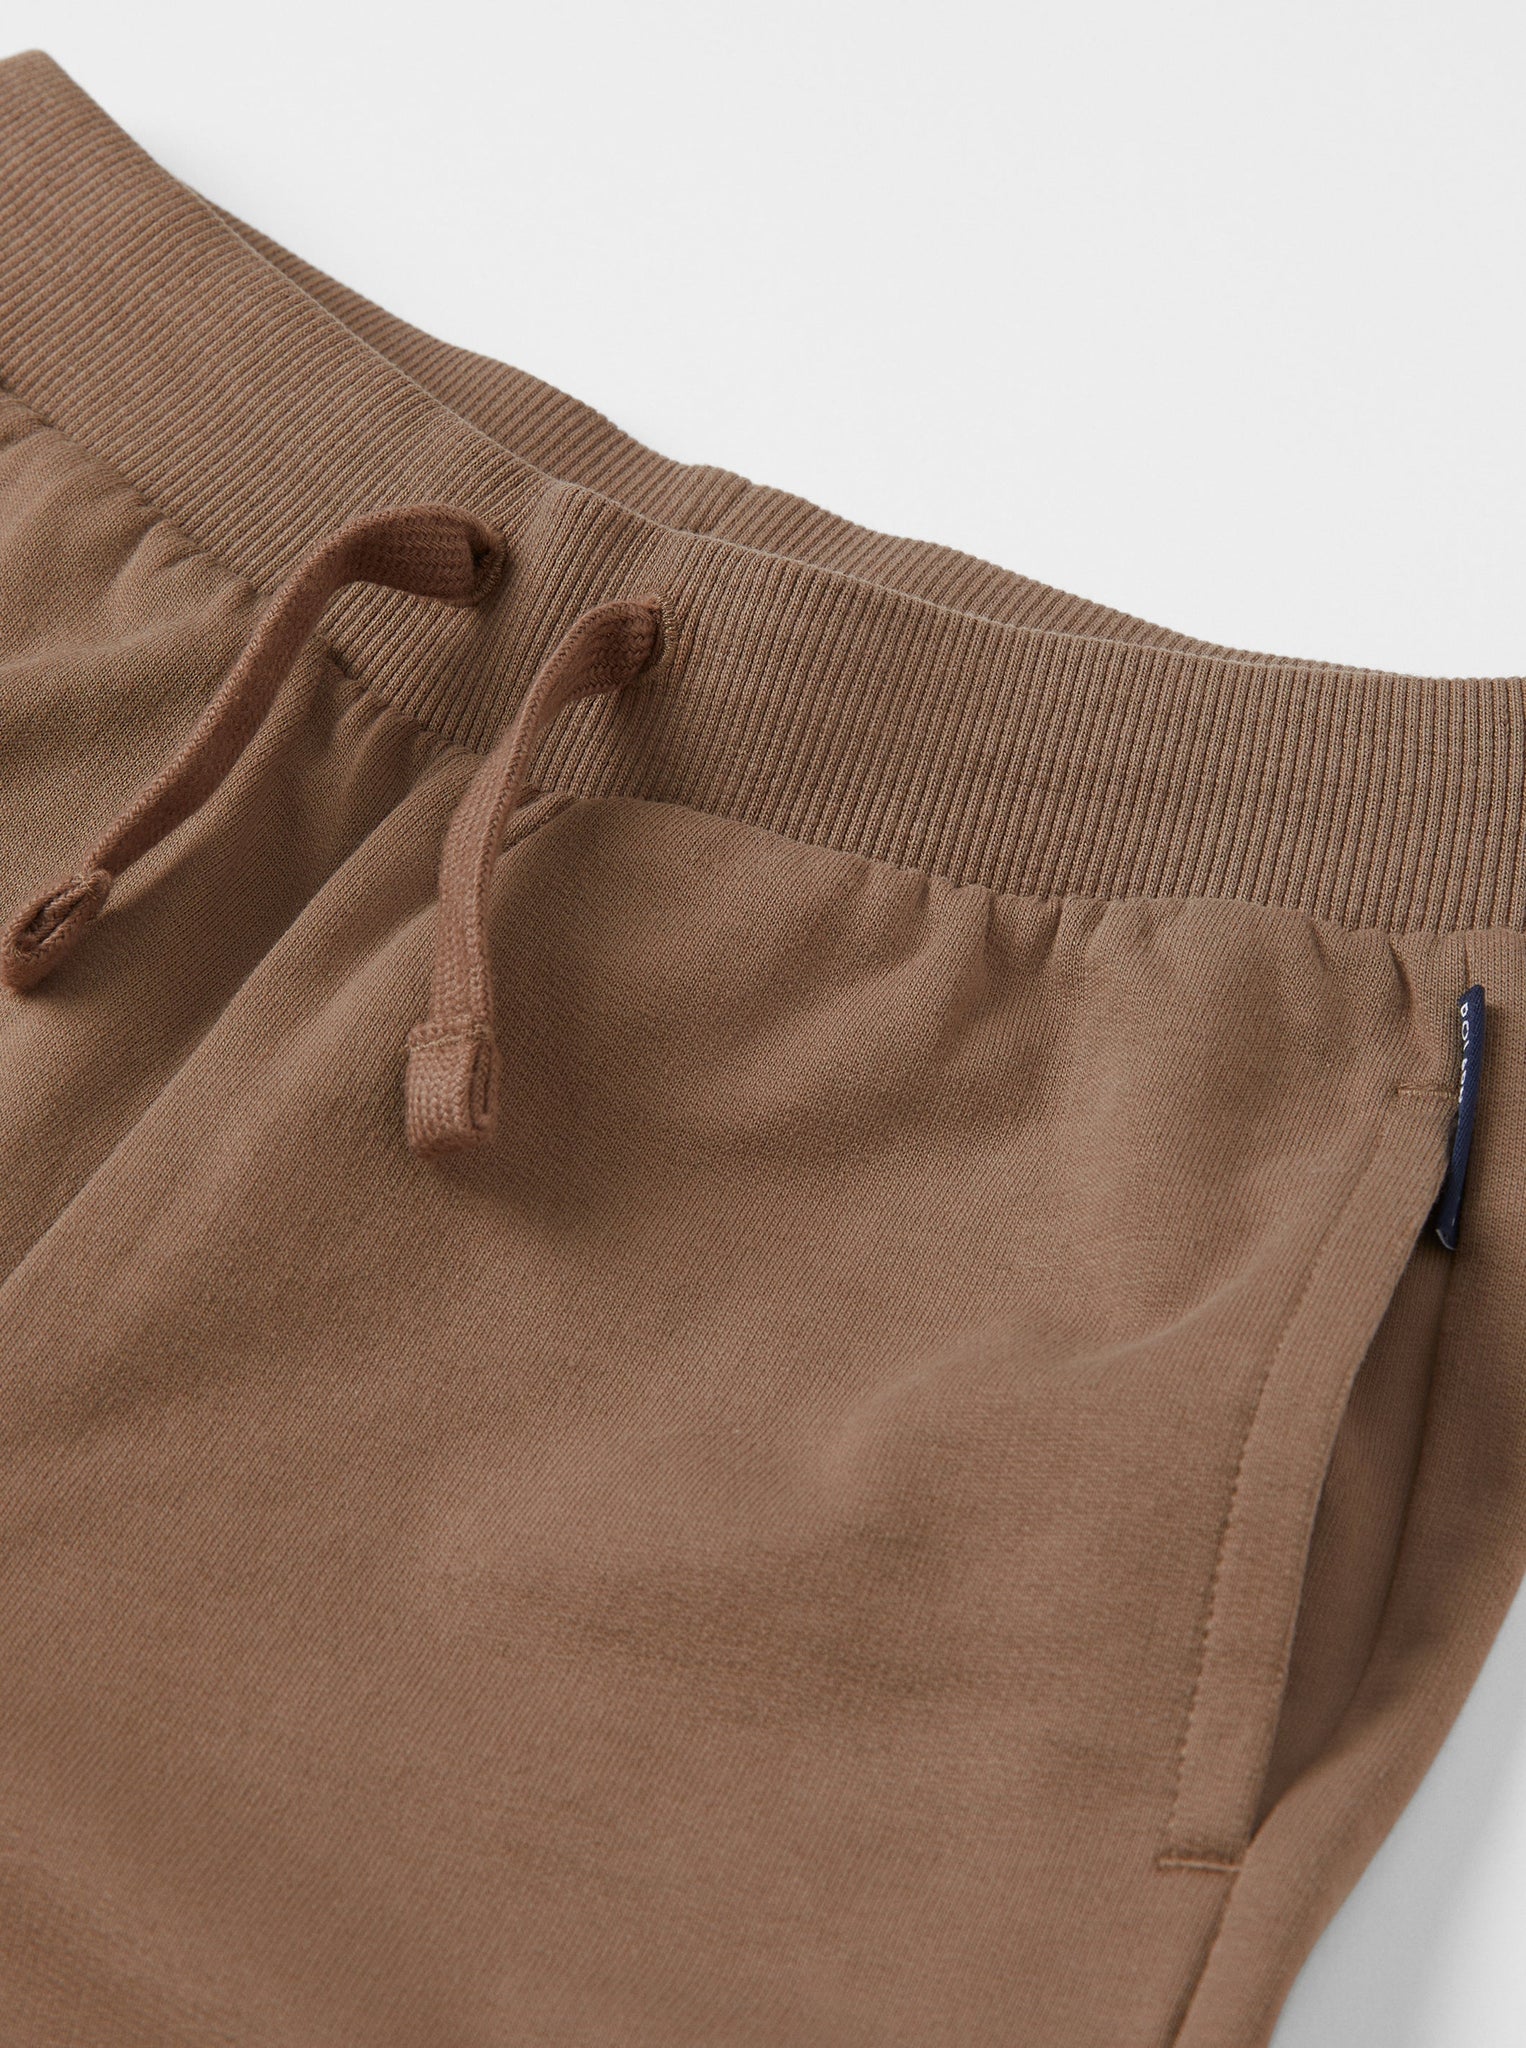 Organic Cotton Brown Kids Joggers from the Polarn O. Pyret kidswear collection. Clothes made using sustainably sourced materials.